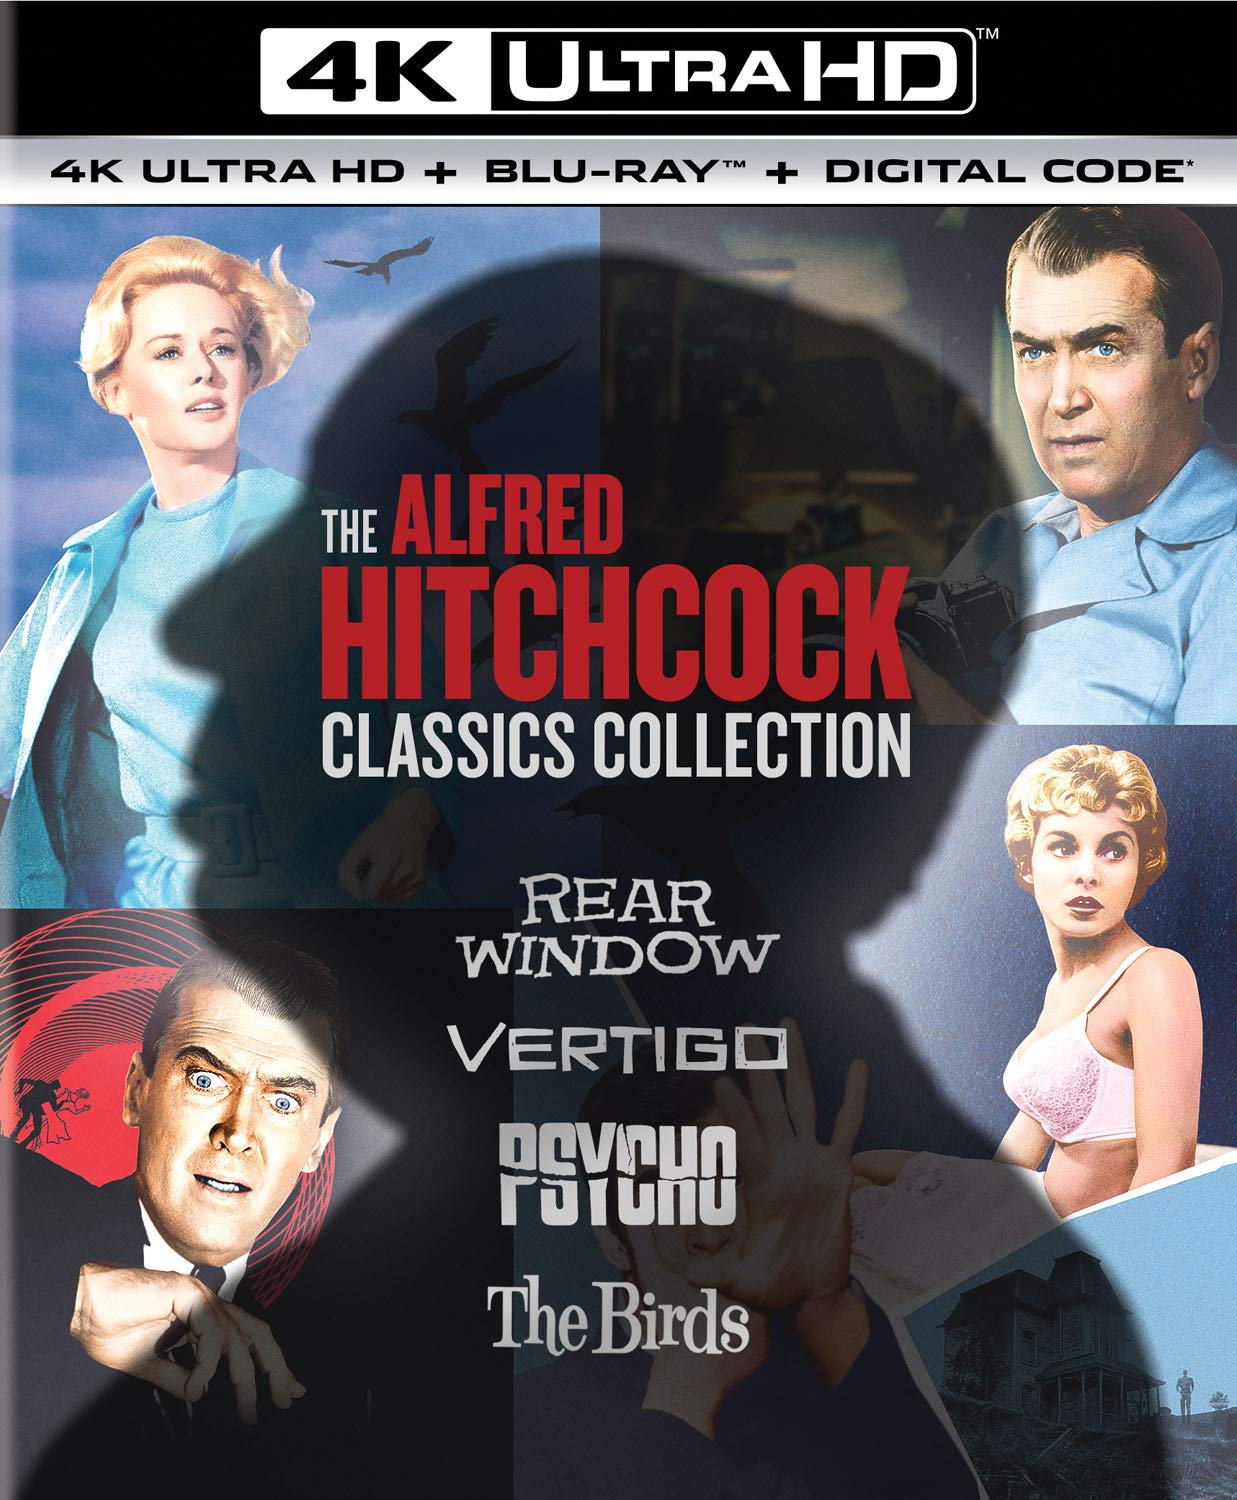 Film Intuition Review Database 4K UHD Blu-ray Review The Alfred Hitchcock Classics Collection